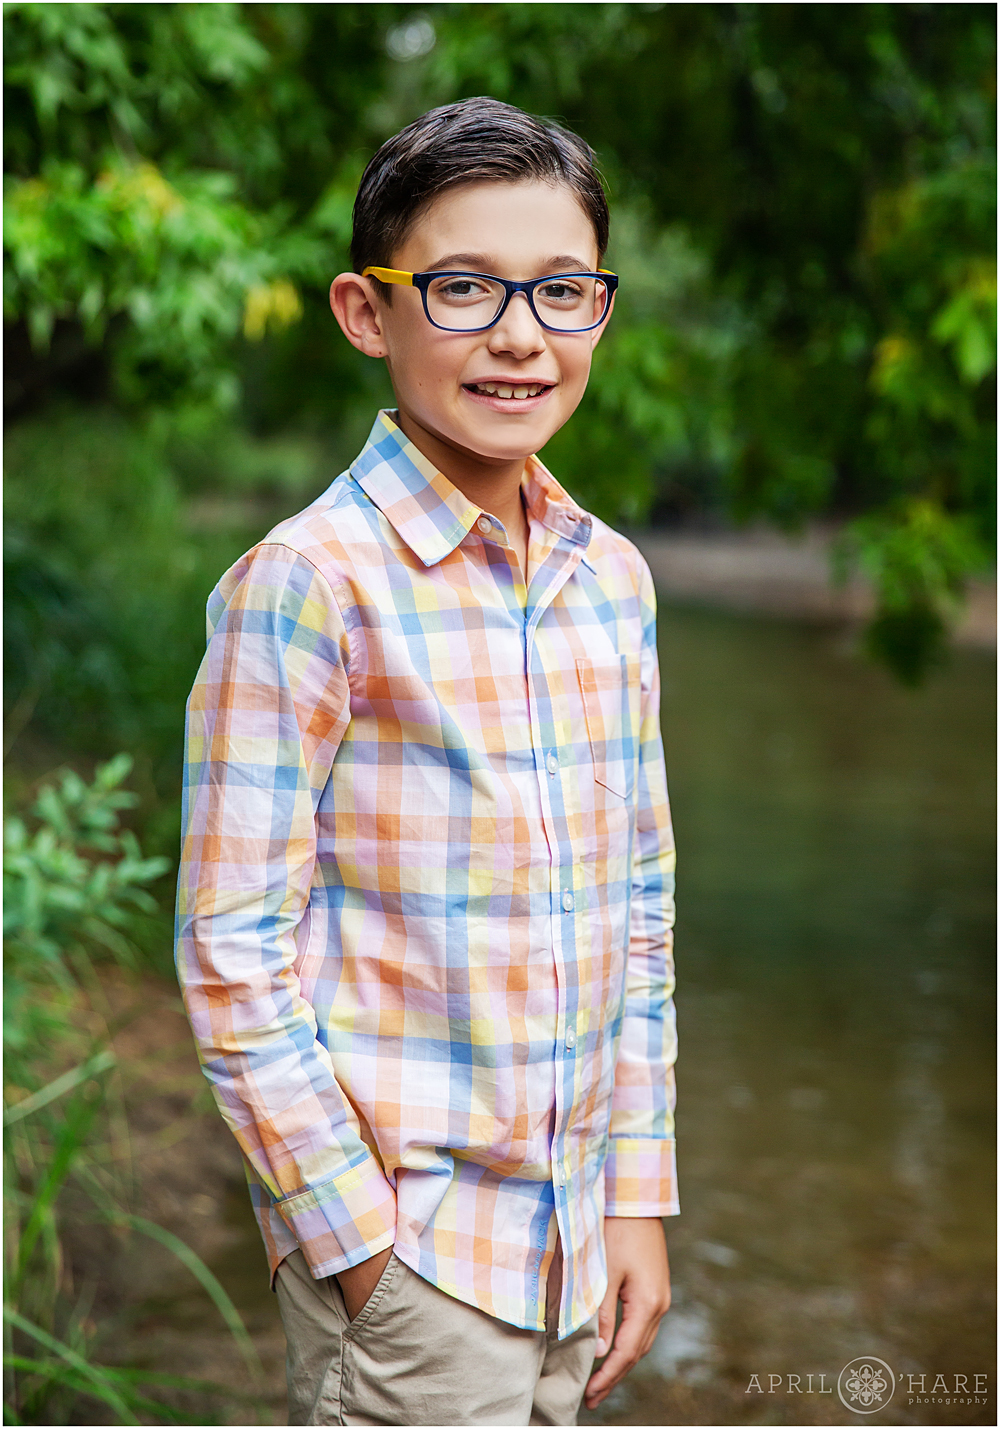 Individual portrait at an outdoor Colorado summer family photoshoot at Cherry Creek Trail